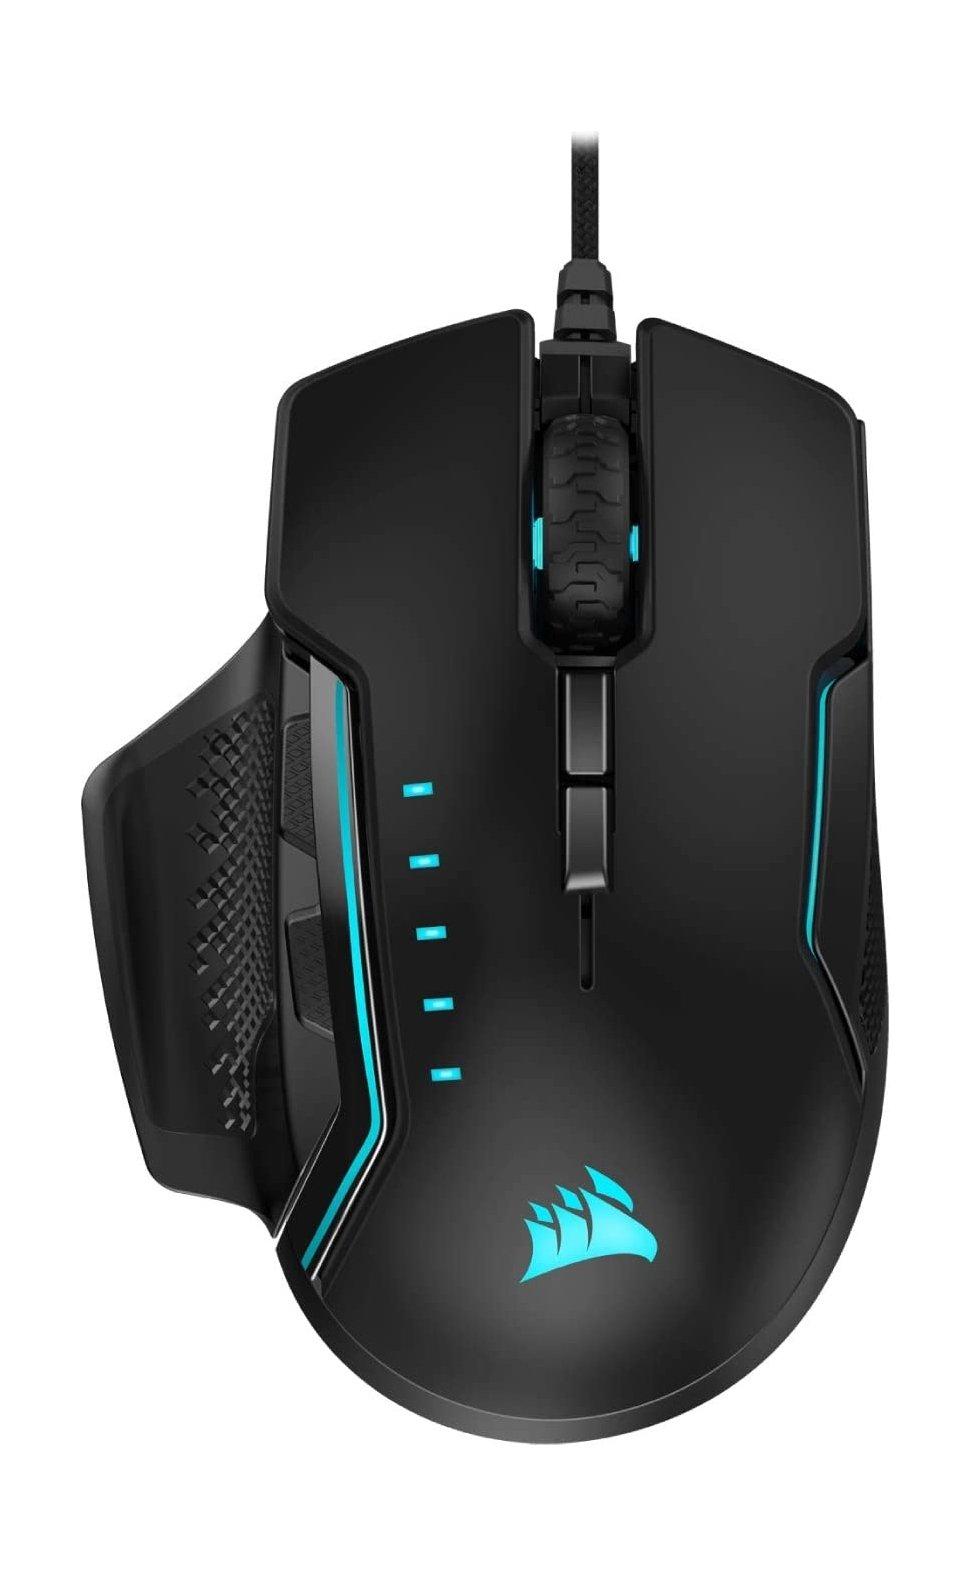 Buy Corsair glaive rgb pro gaming mouse - black in Kuwait